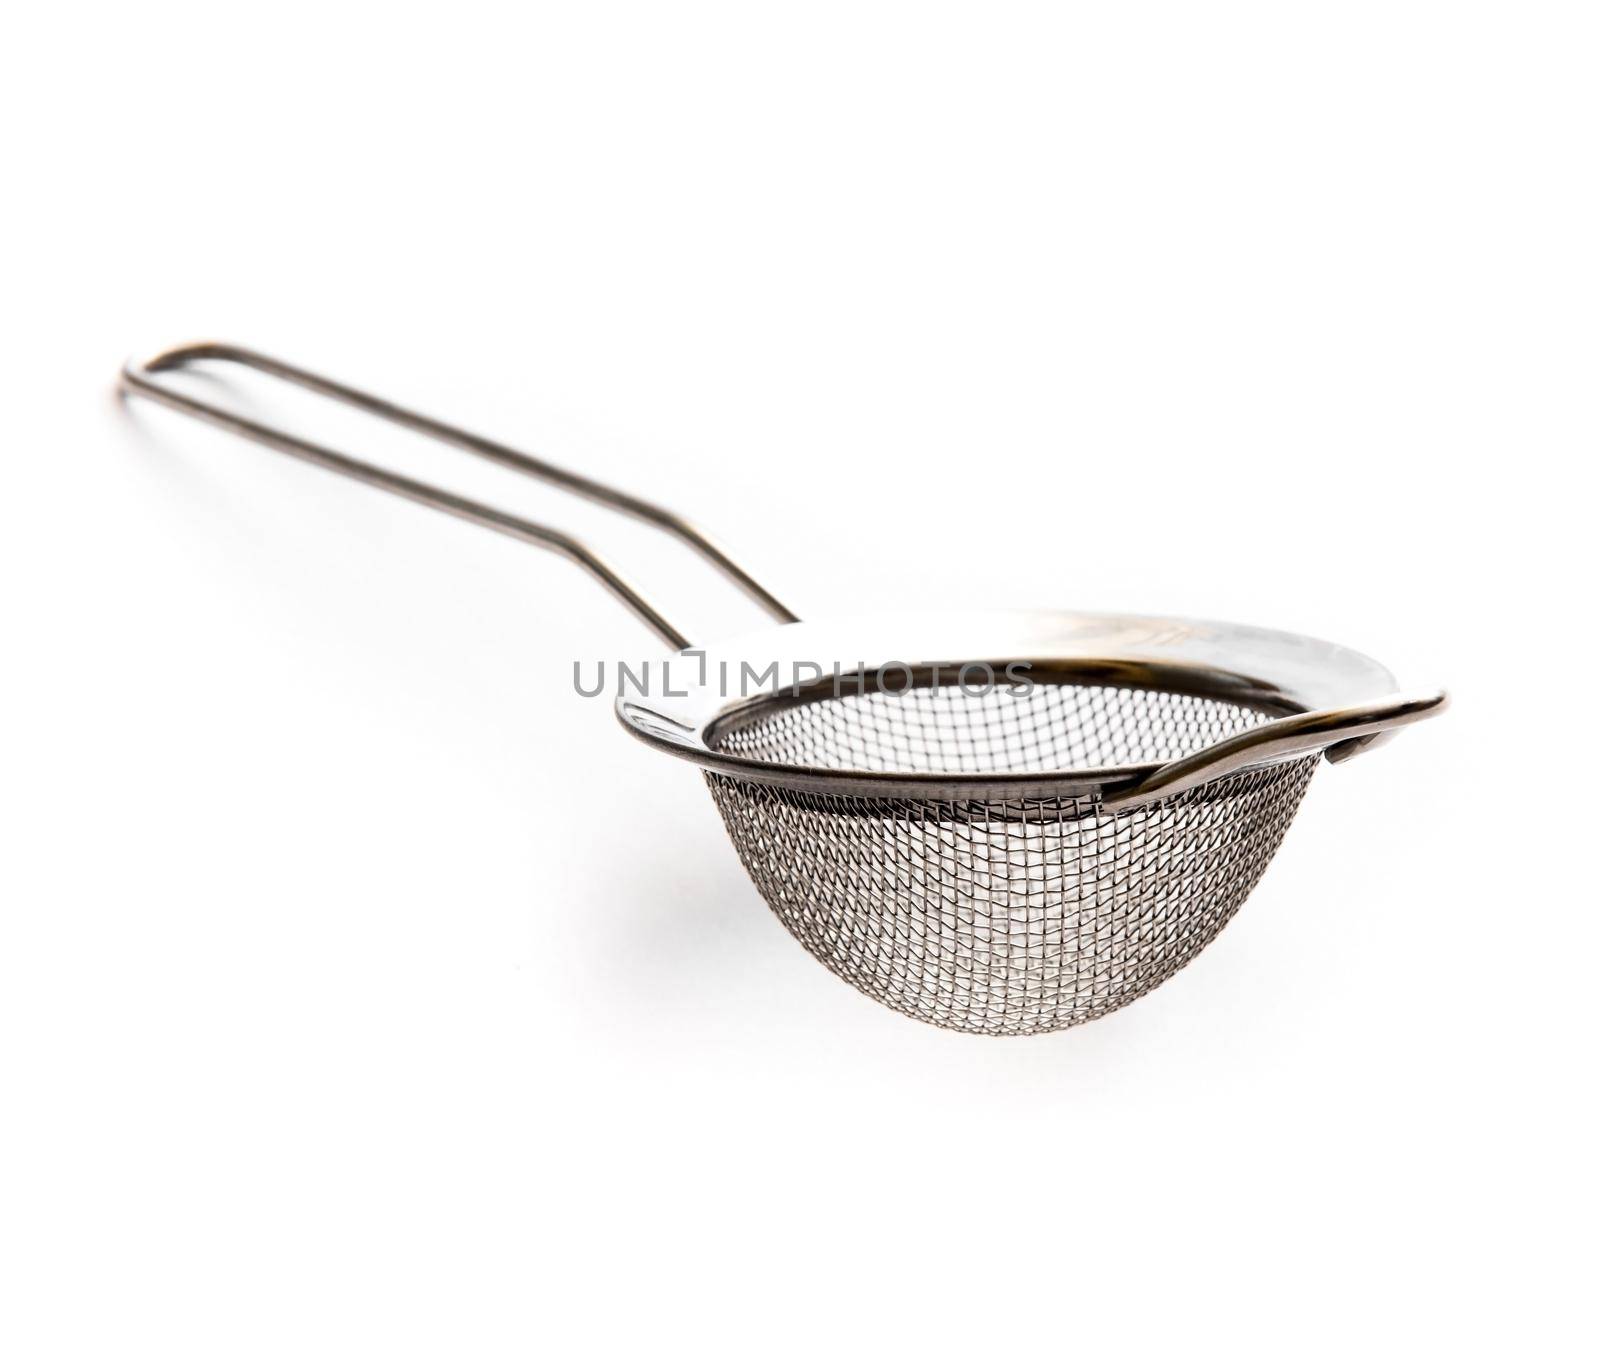 metal kitchen strainer isolated on a white background